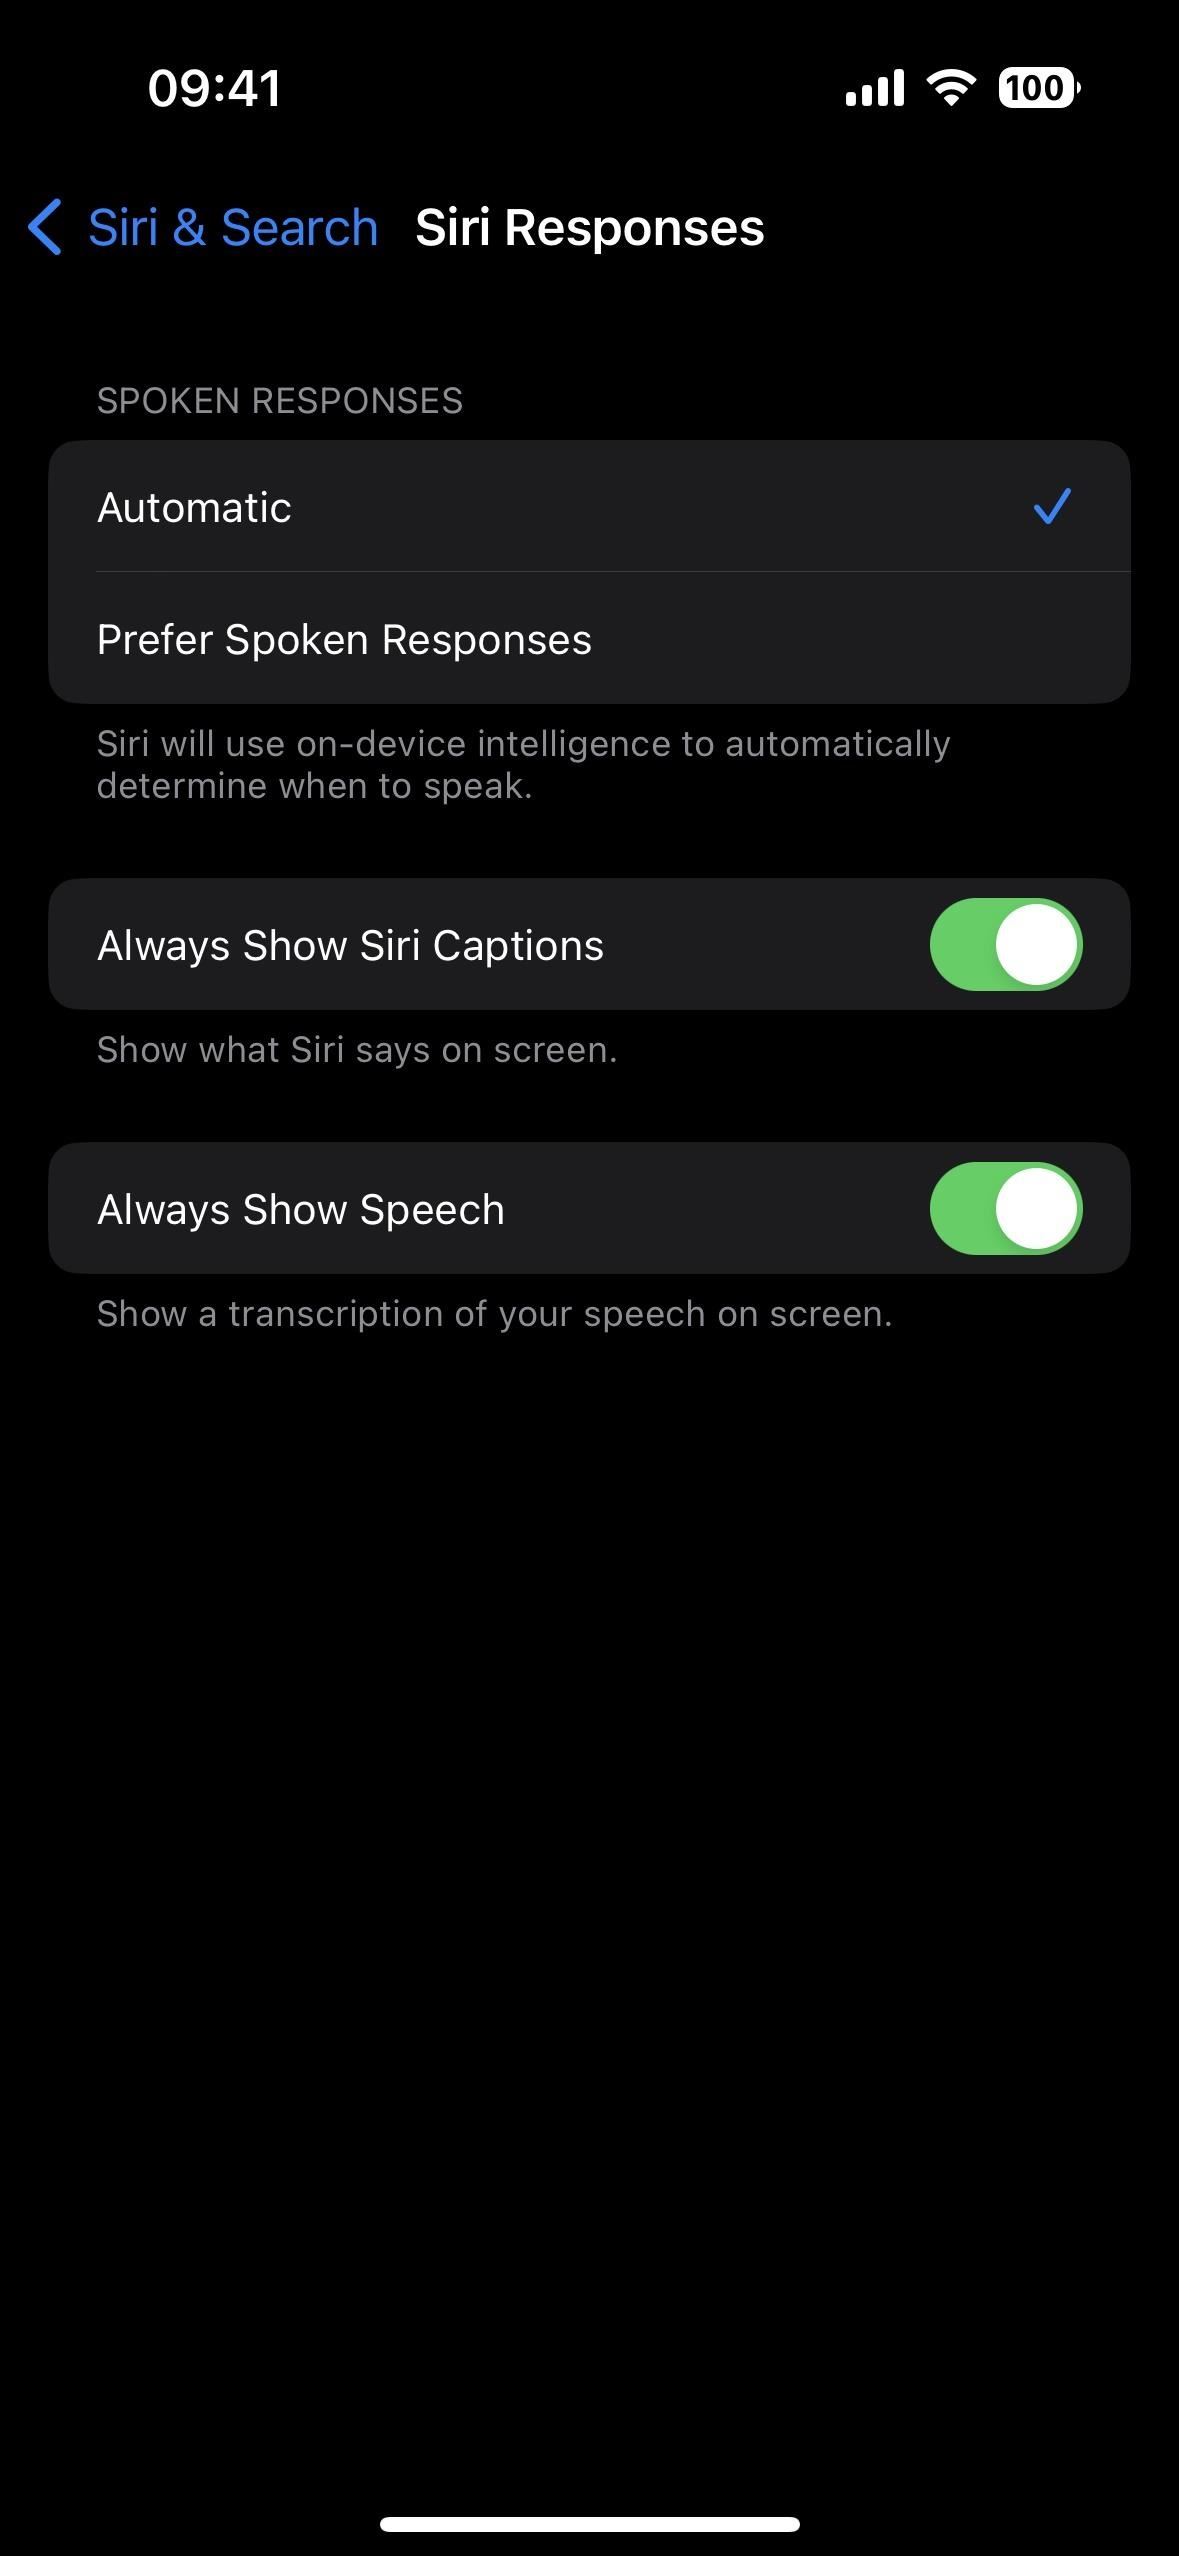 Apple just fixed the Siri voice response issue in iOS 16, giving you more control over audible responses.